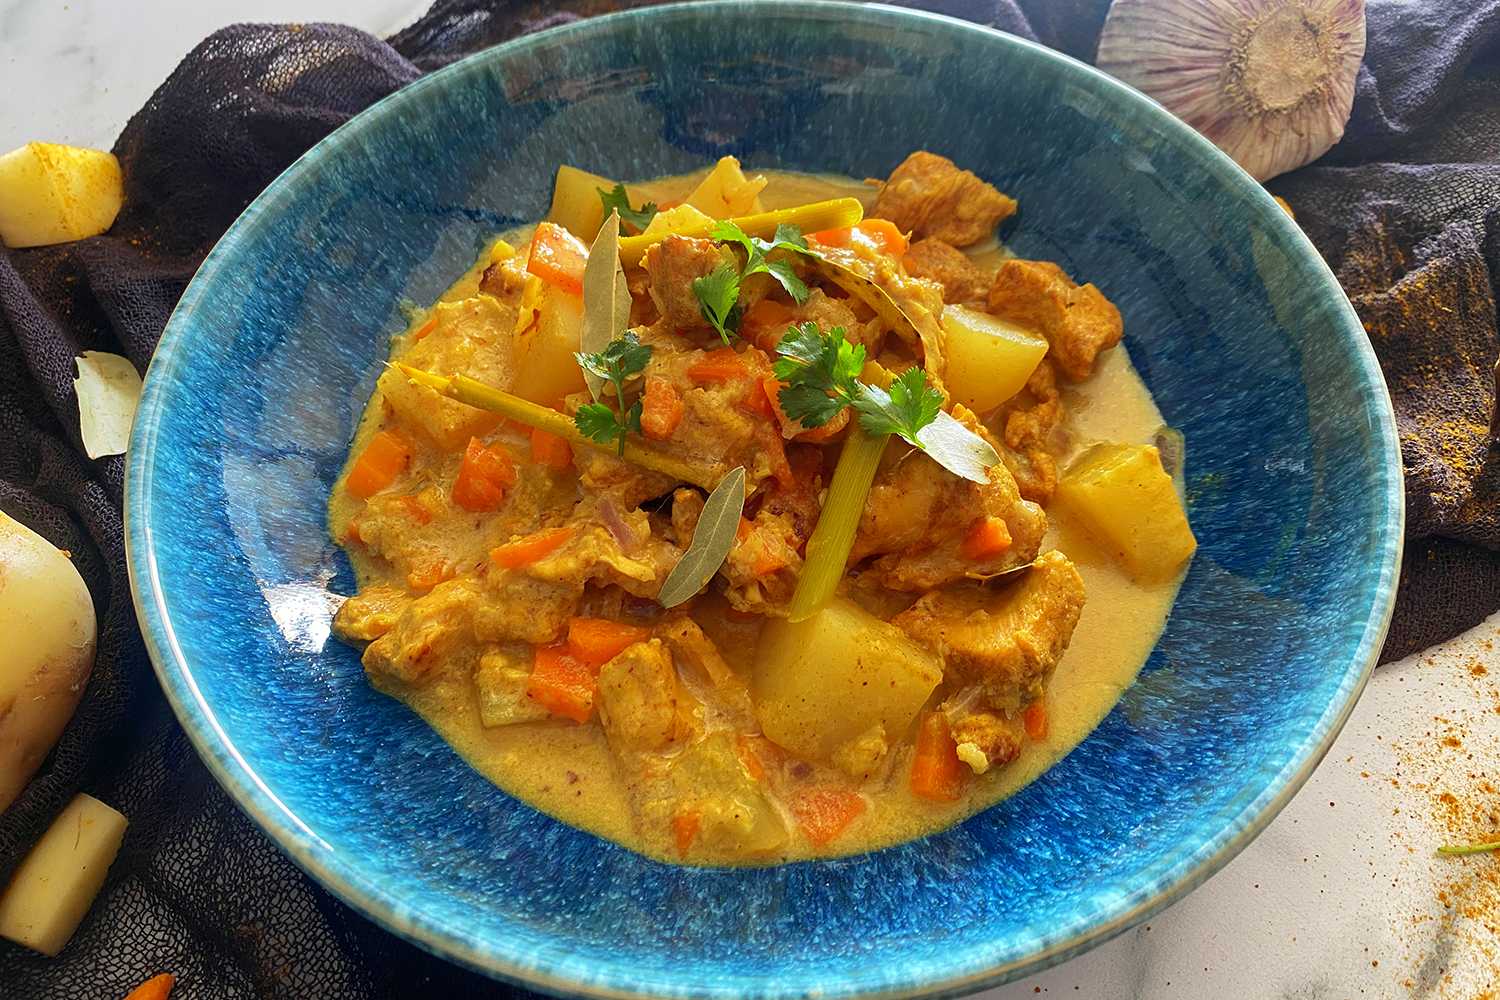 chicken cubes in a yellow curry sauce mixed with carrot and potato cubes with parsley on top